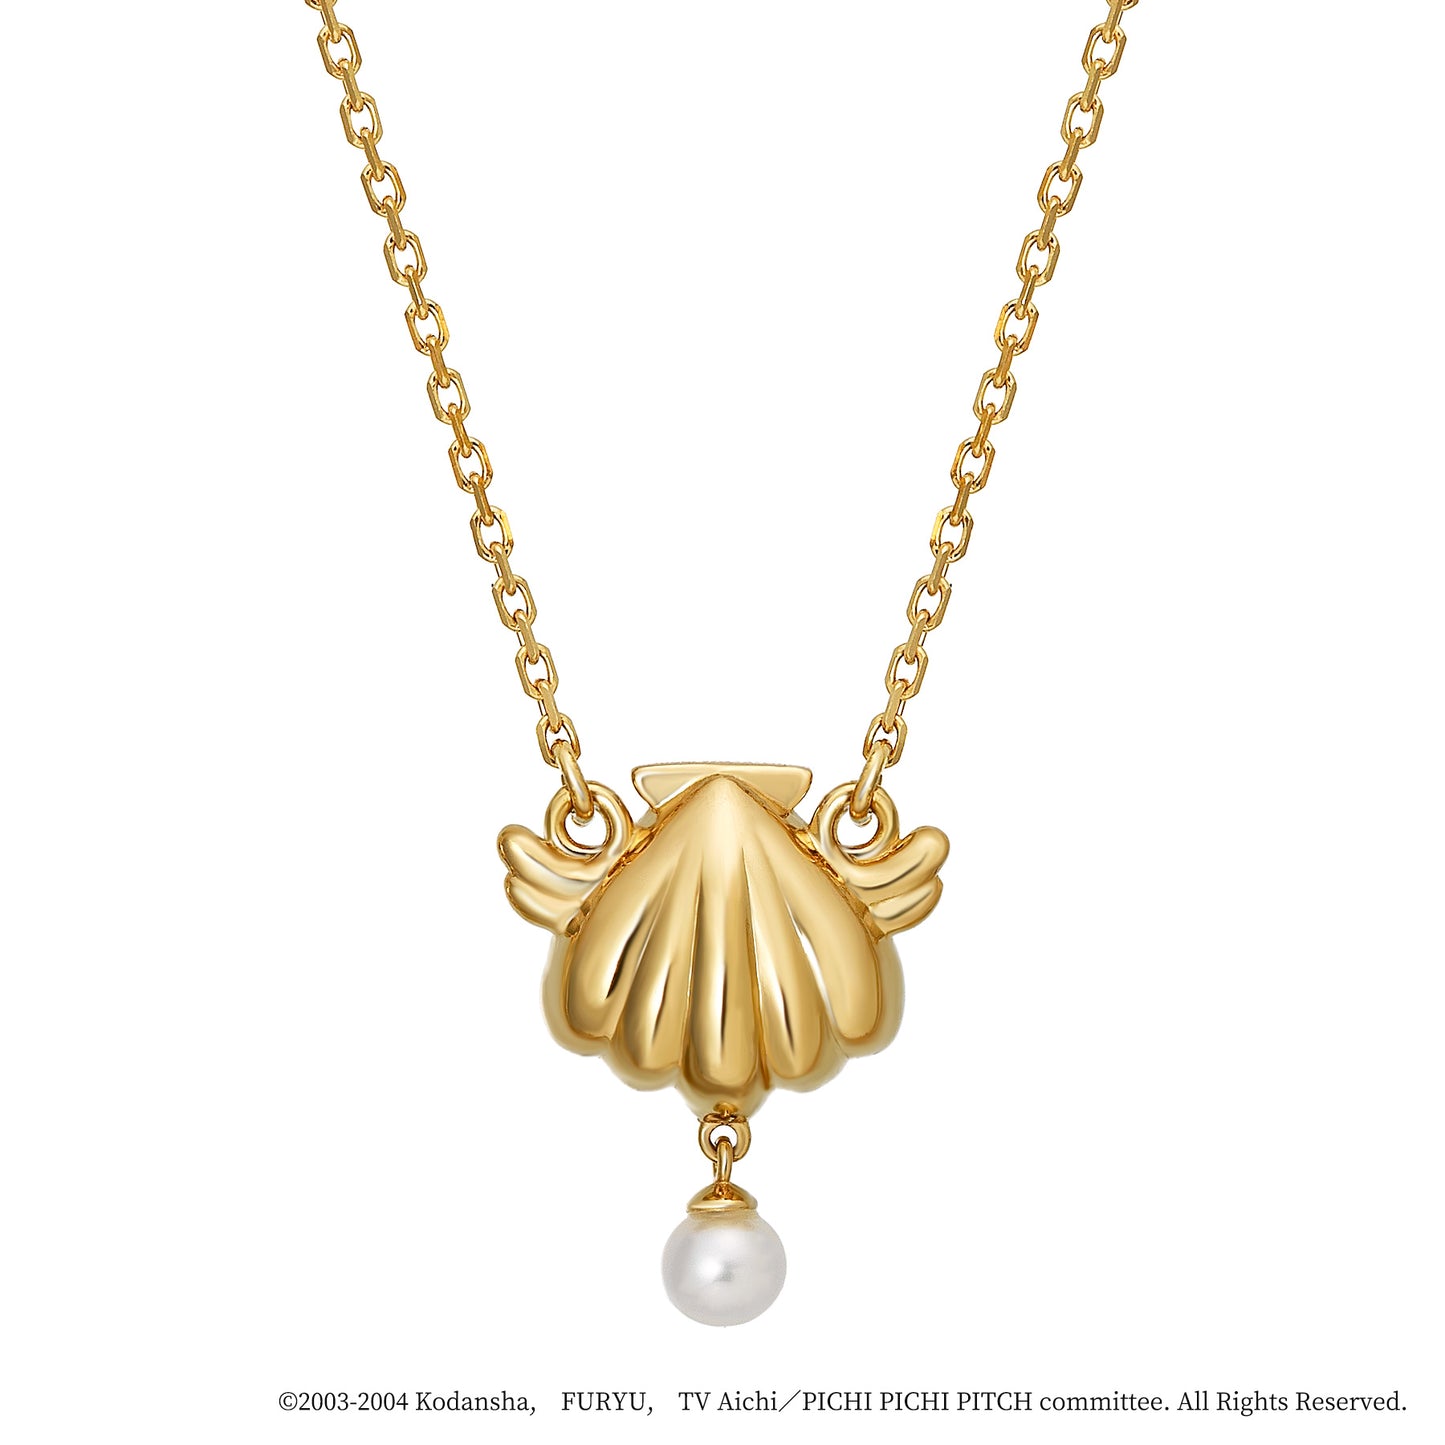 Mermaid Melody Pichi Pichi Pitch - Reversible Necklace (Caren) - Product Image